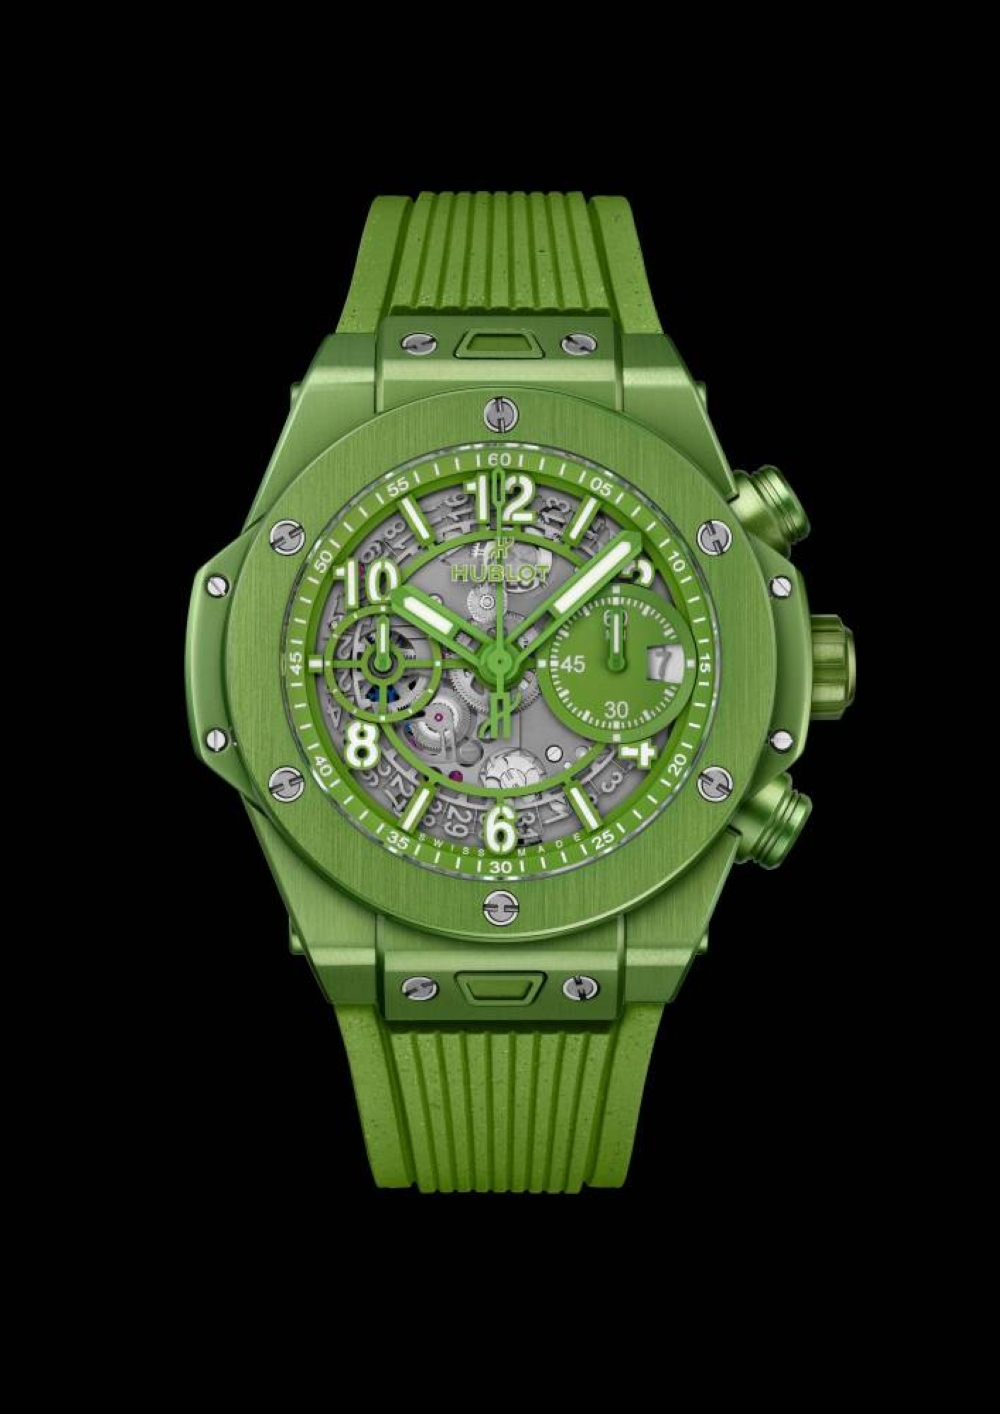 Hublot and Nespresso join forces for creation of Big Bang timepiece ...